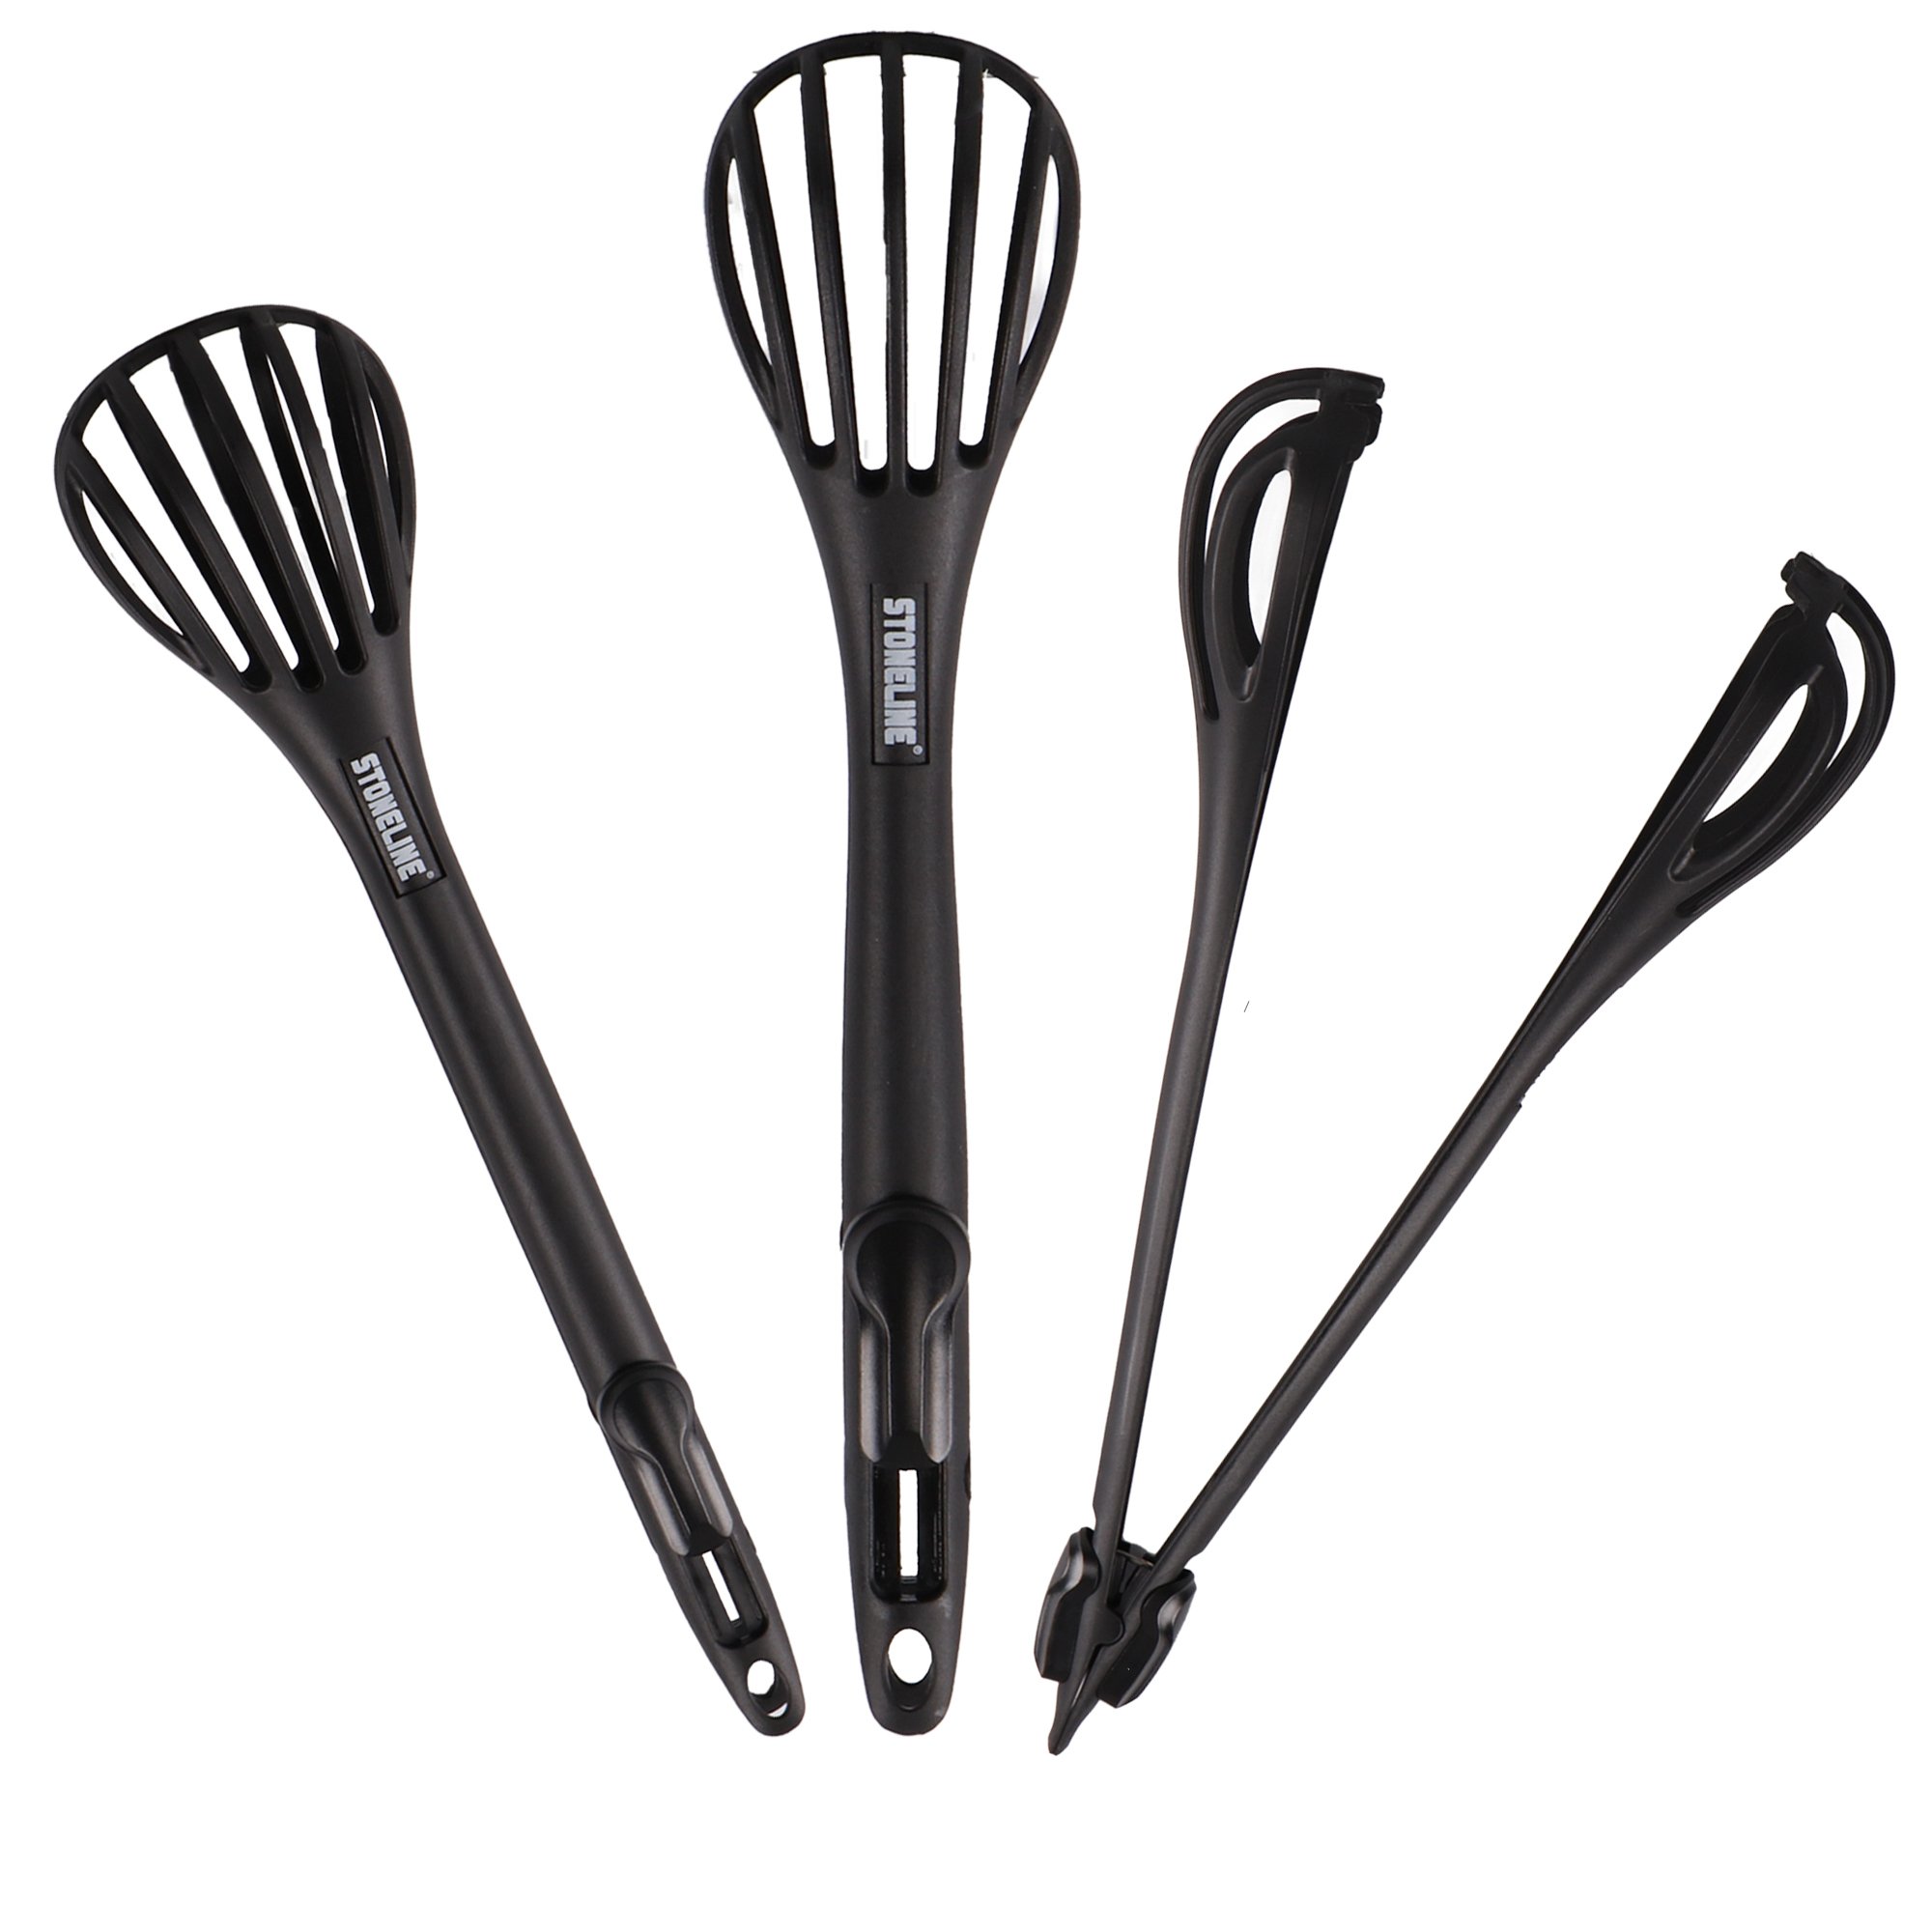 STONELINE® 3 pc Food Clip & Whisk Set, 2 in 1 Multifunctional Whisk, Heat-Resistant